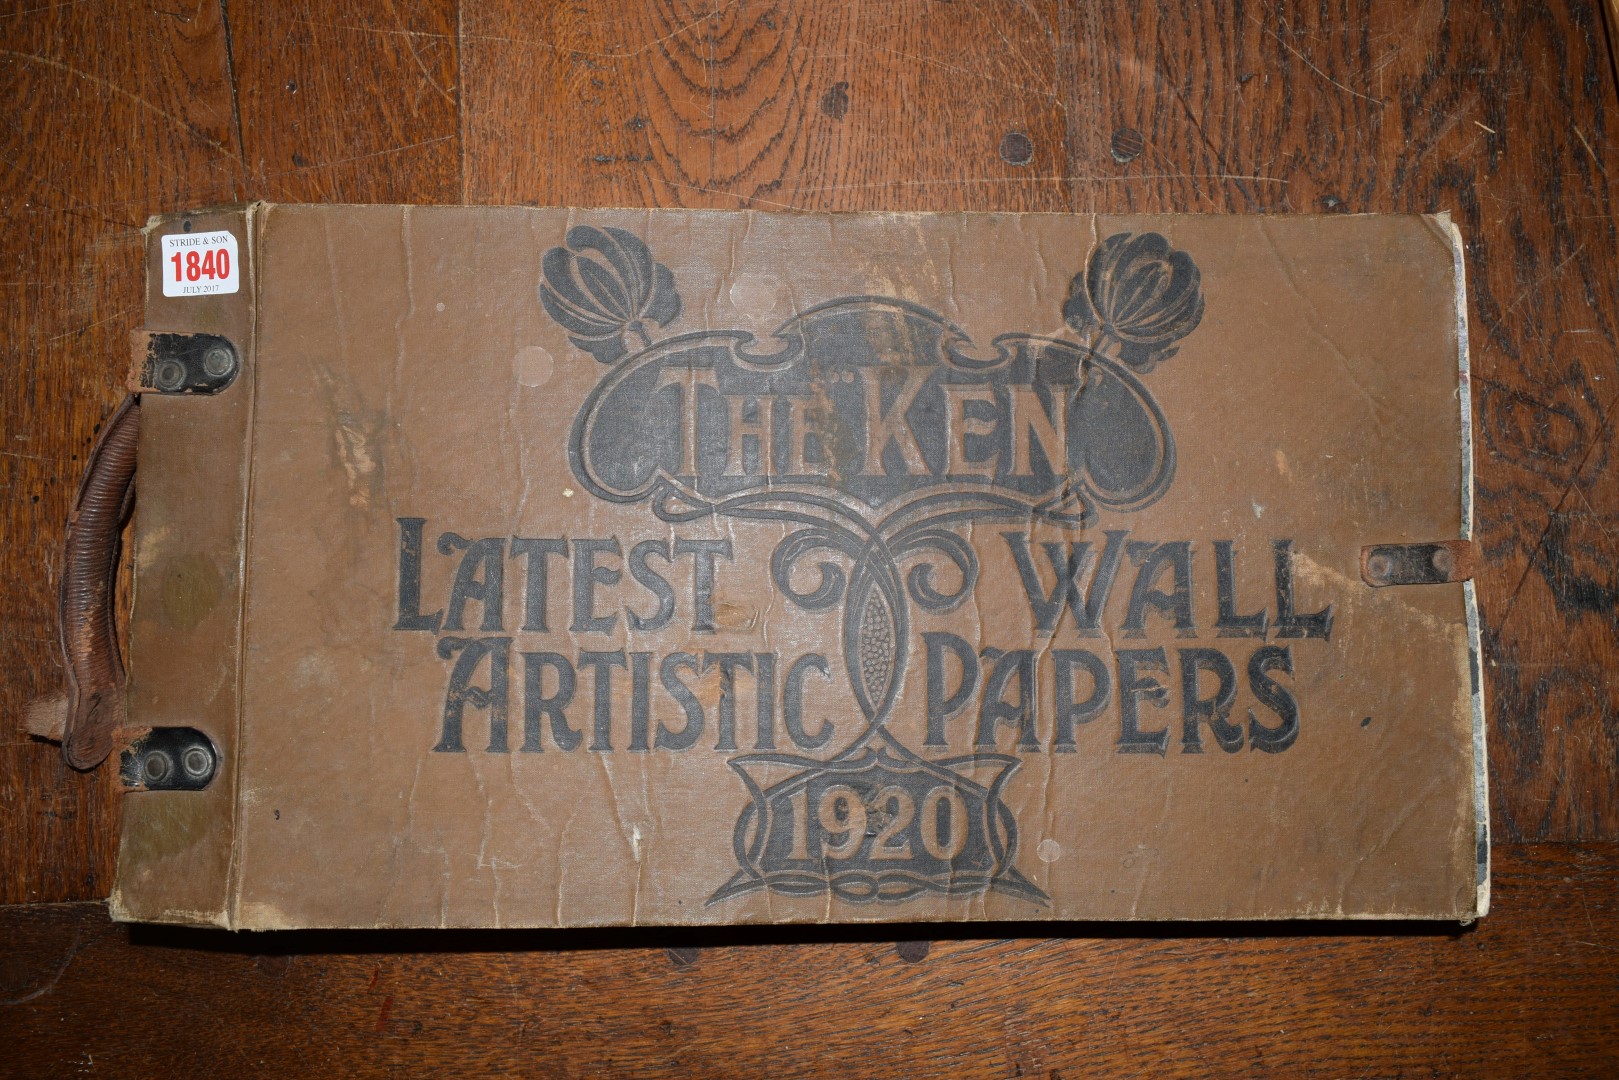 The Ken 'Latest Artistic Wallpapers 1920'.